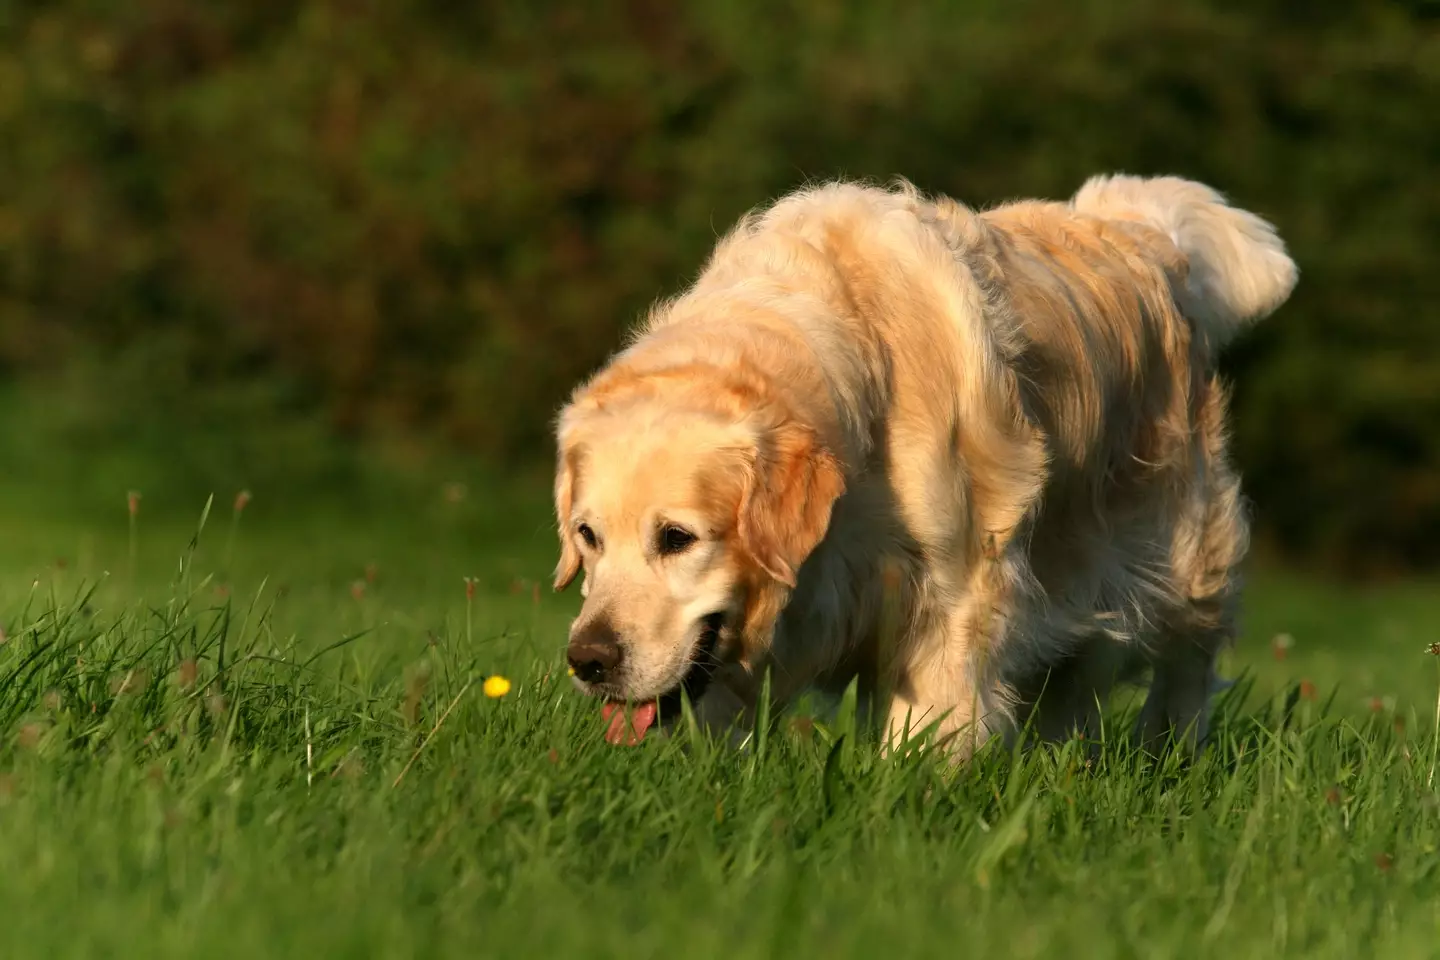 You can spend the day with golden retrievers.